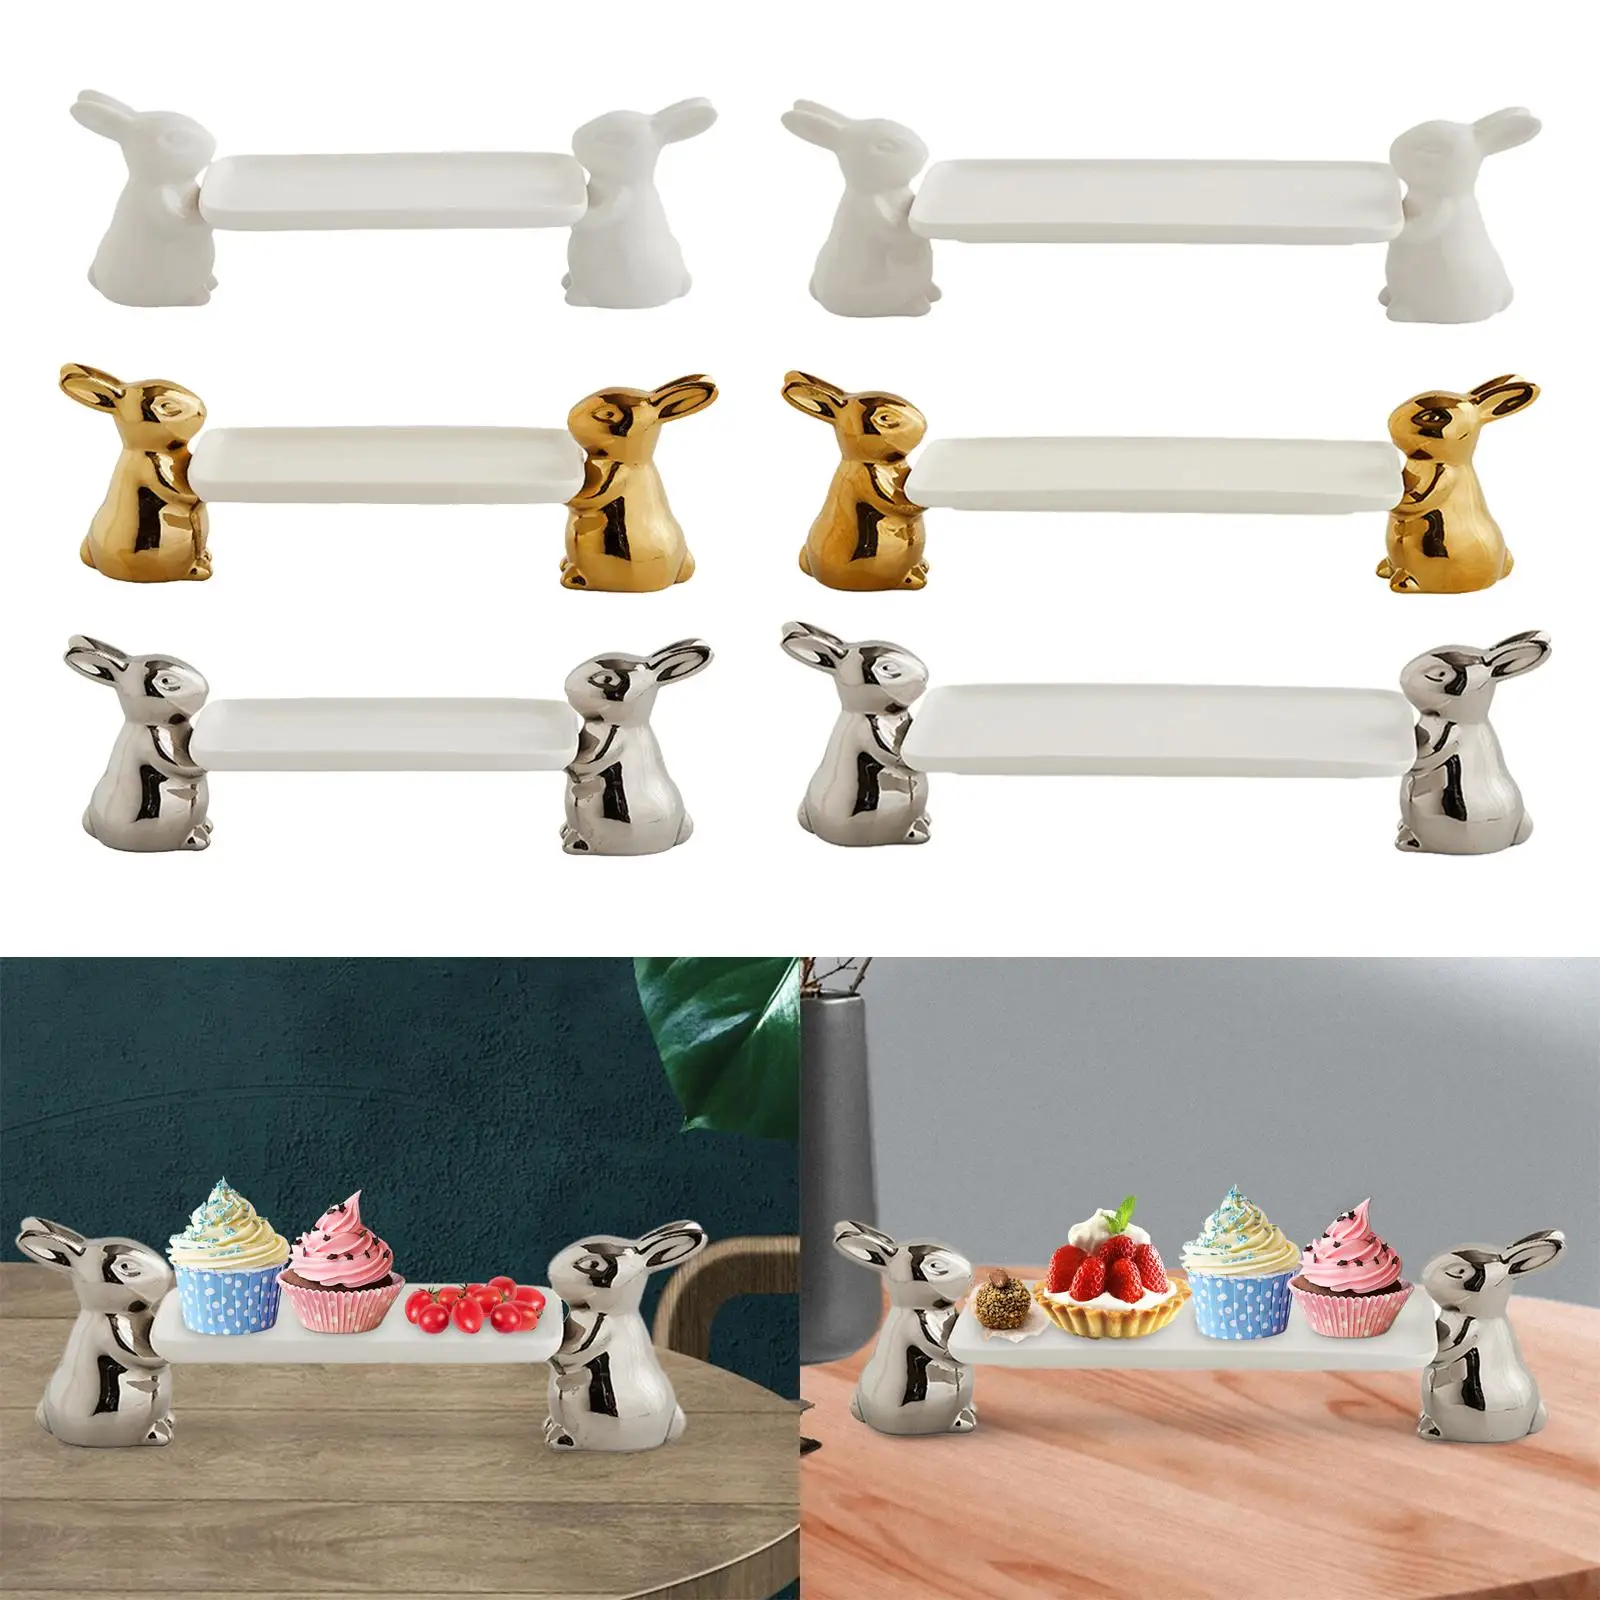 Ceramic Cake Tray Portable Housewarming Gifts Novelty Cake Rack for Event Birthday Party Home Ornaments